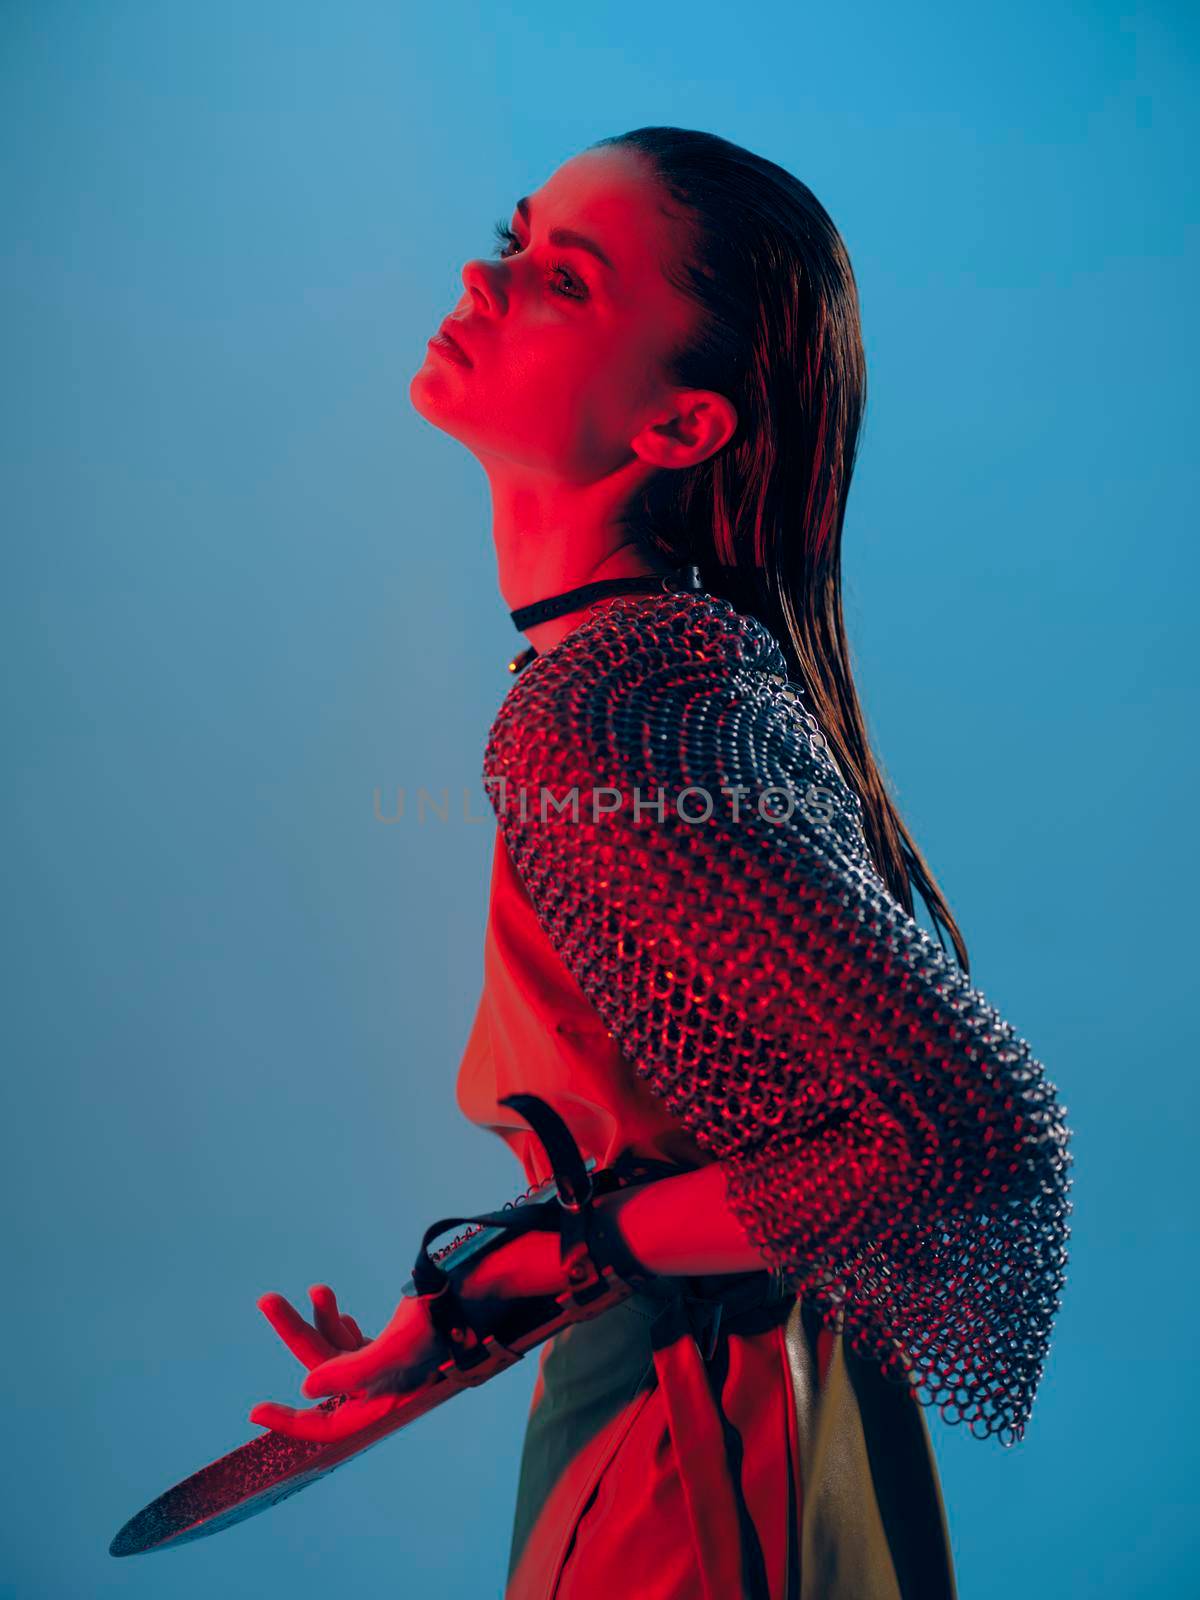 cyberpunk photo pretty woman in dress arm in armor chain mail protection blue background by SHOTPRIME